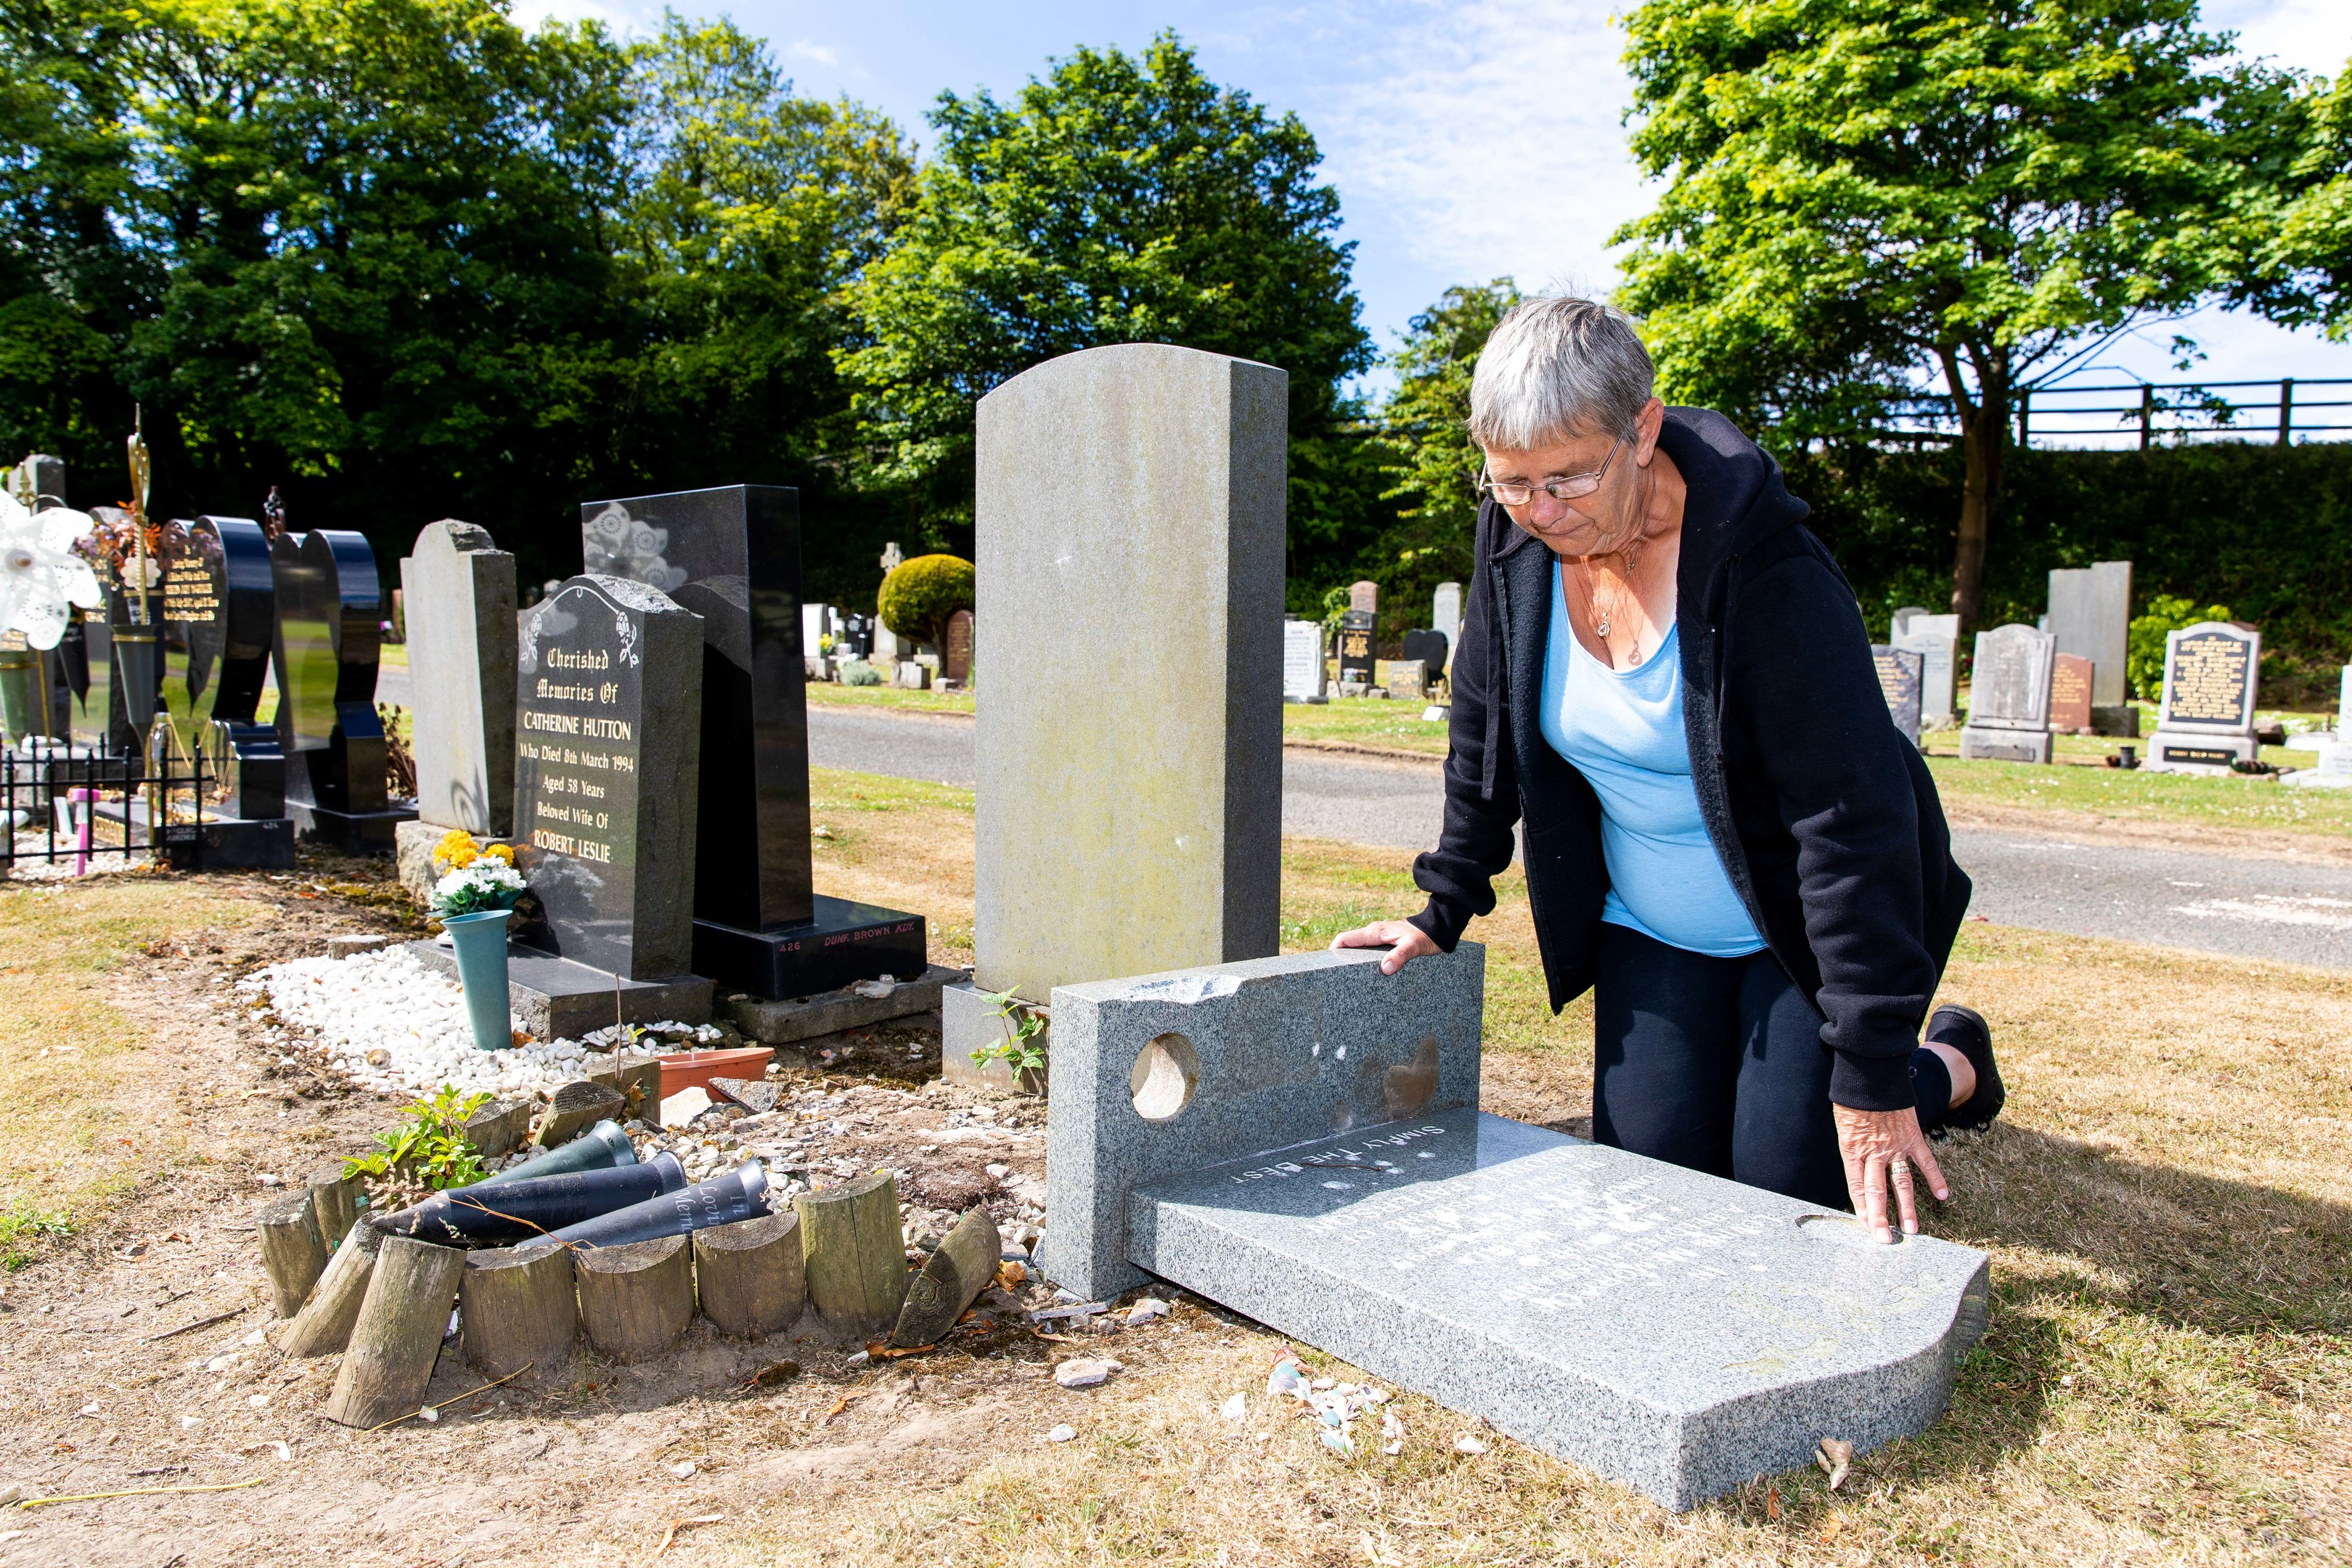 Courier News - Fife - Sarah Vesty - Graves Vandelism in at cemetary - CR0002372 - Inverkeithing - Picture Shows: Isobel Ward (67) from Inverkeithing is hurt & disgusted in what appears a targetted attach on the grave stone of her late husband and a memorial plaque in seperate section of cemetary - Thursday 5th July 2018